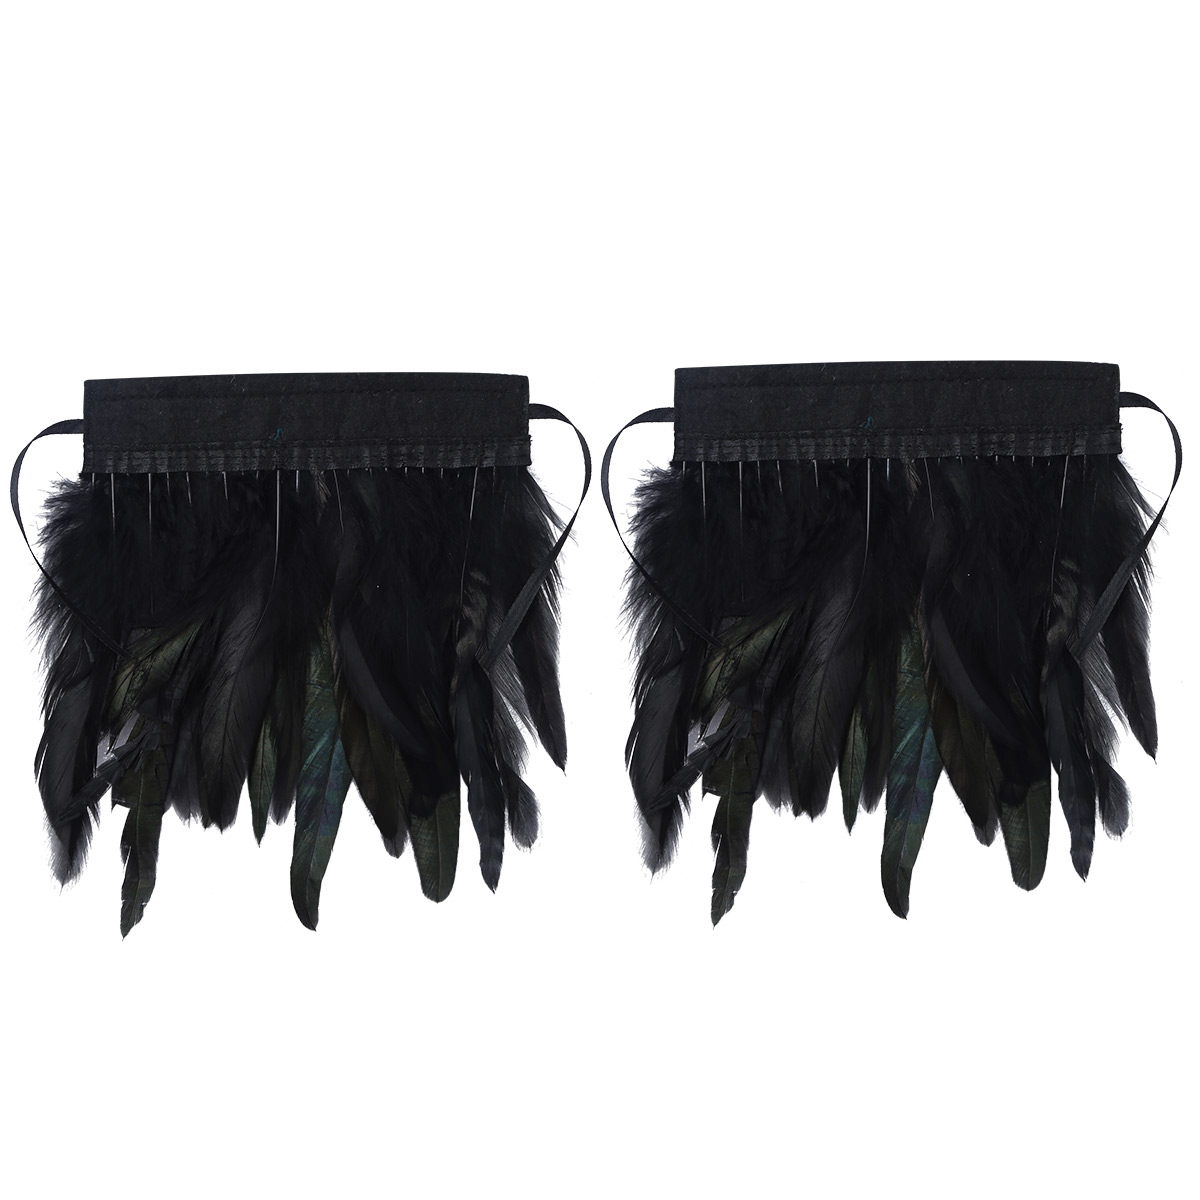 YiZYiF DIY Feather Wrist Cuffs Black Real Natural Dyed Rooster Feather Wrist Cuffs with Ribbon Ties for Game Party Halloween